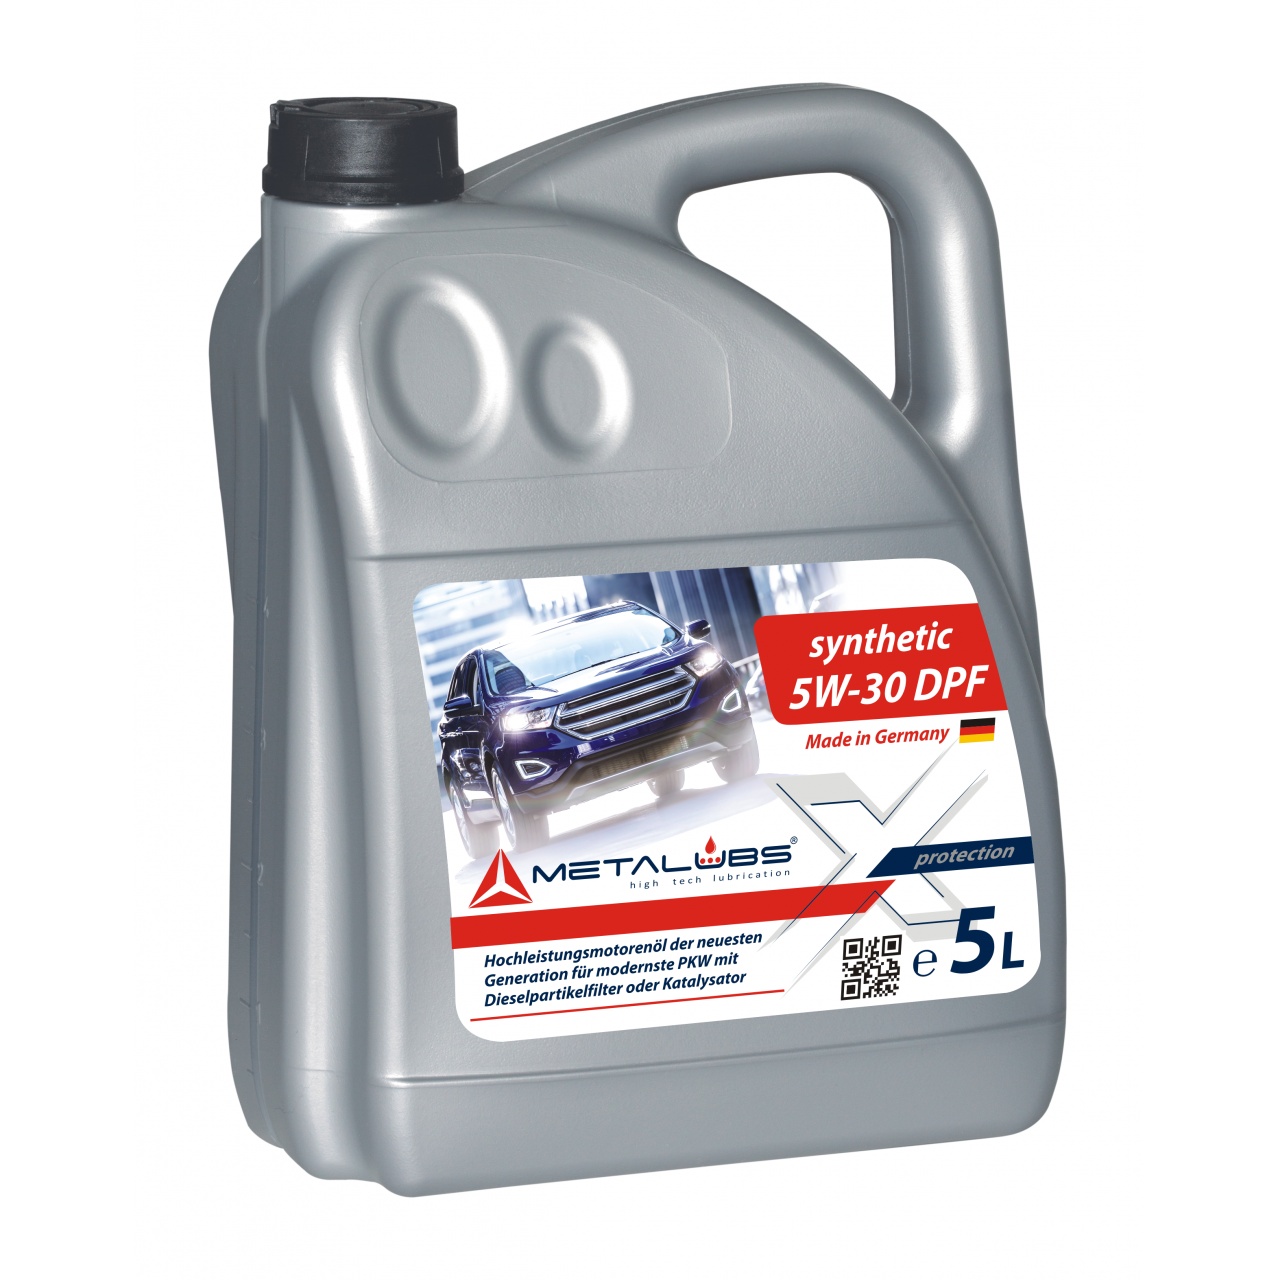 Metalubs Synthetic 5W-30 DPF 5l